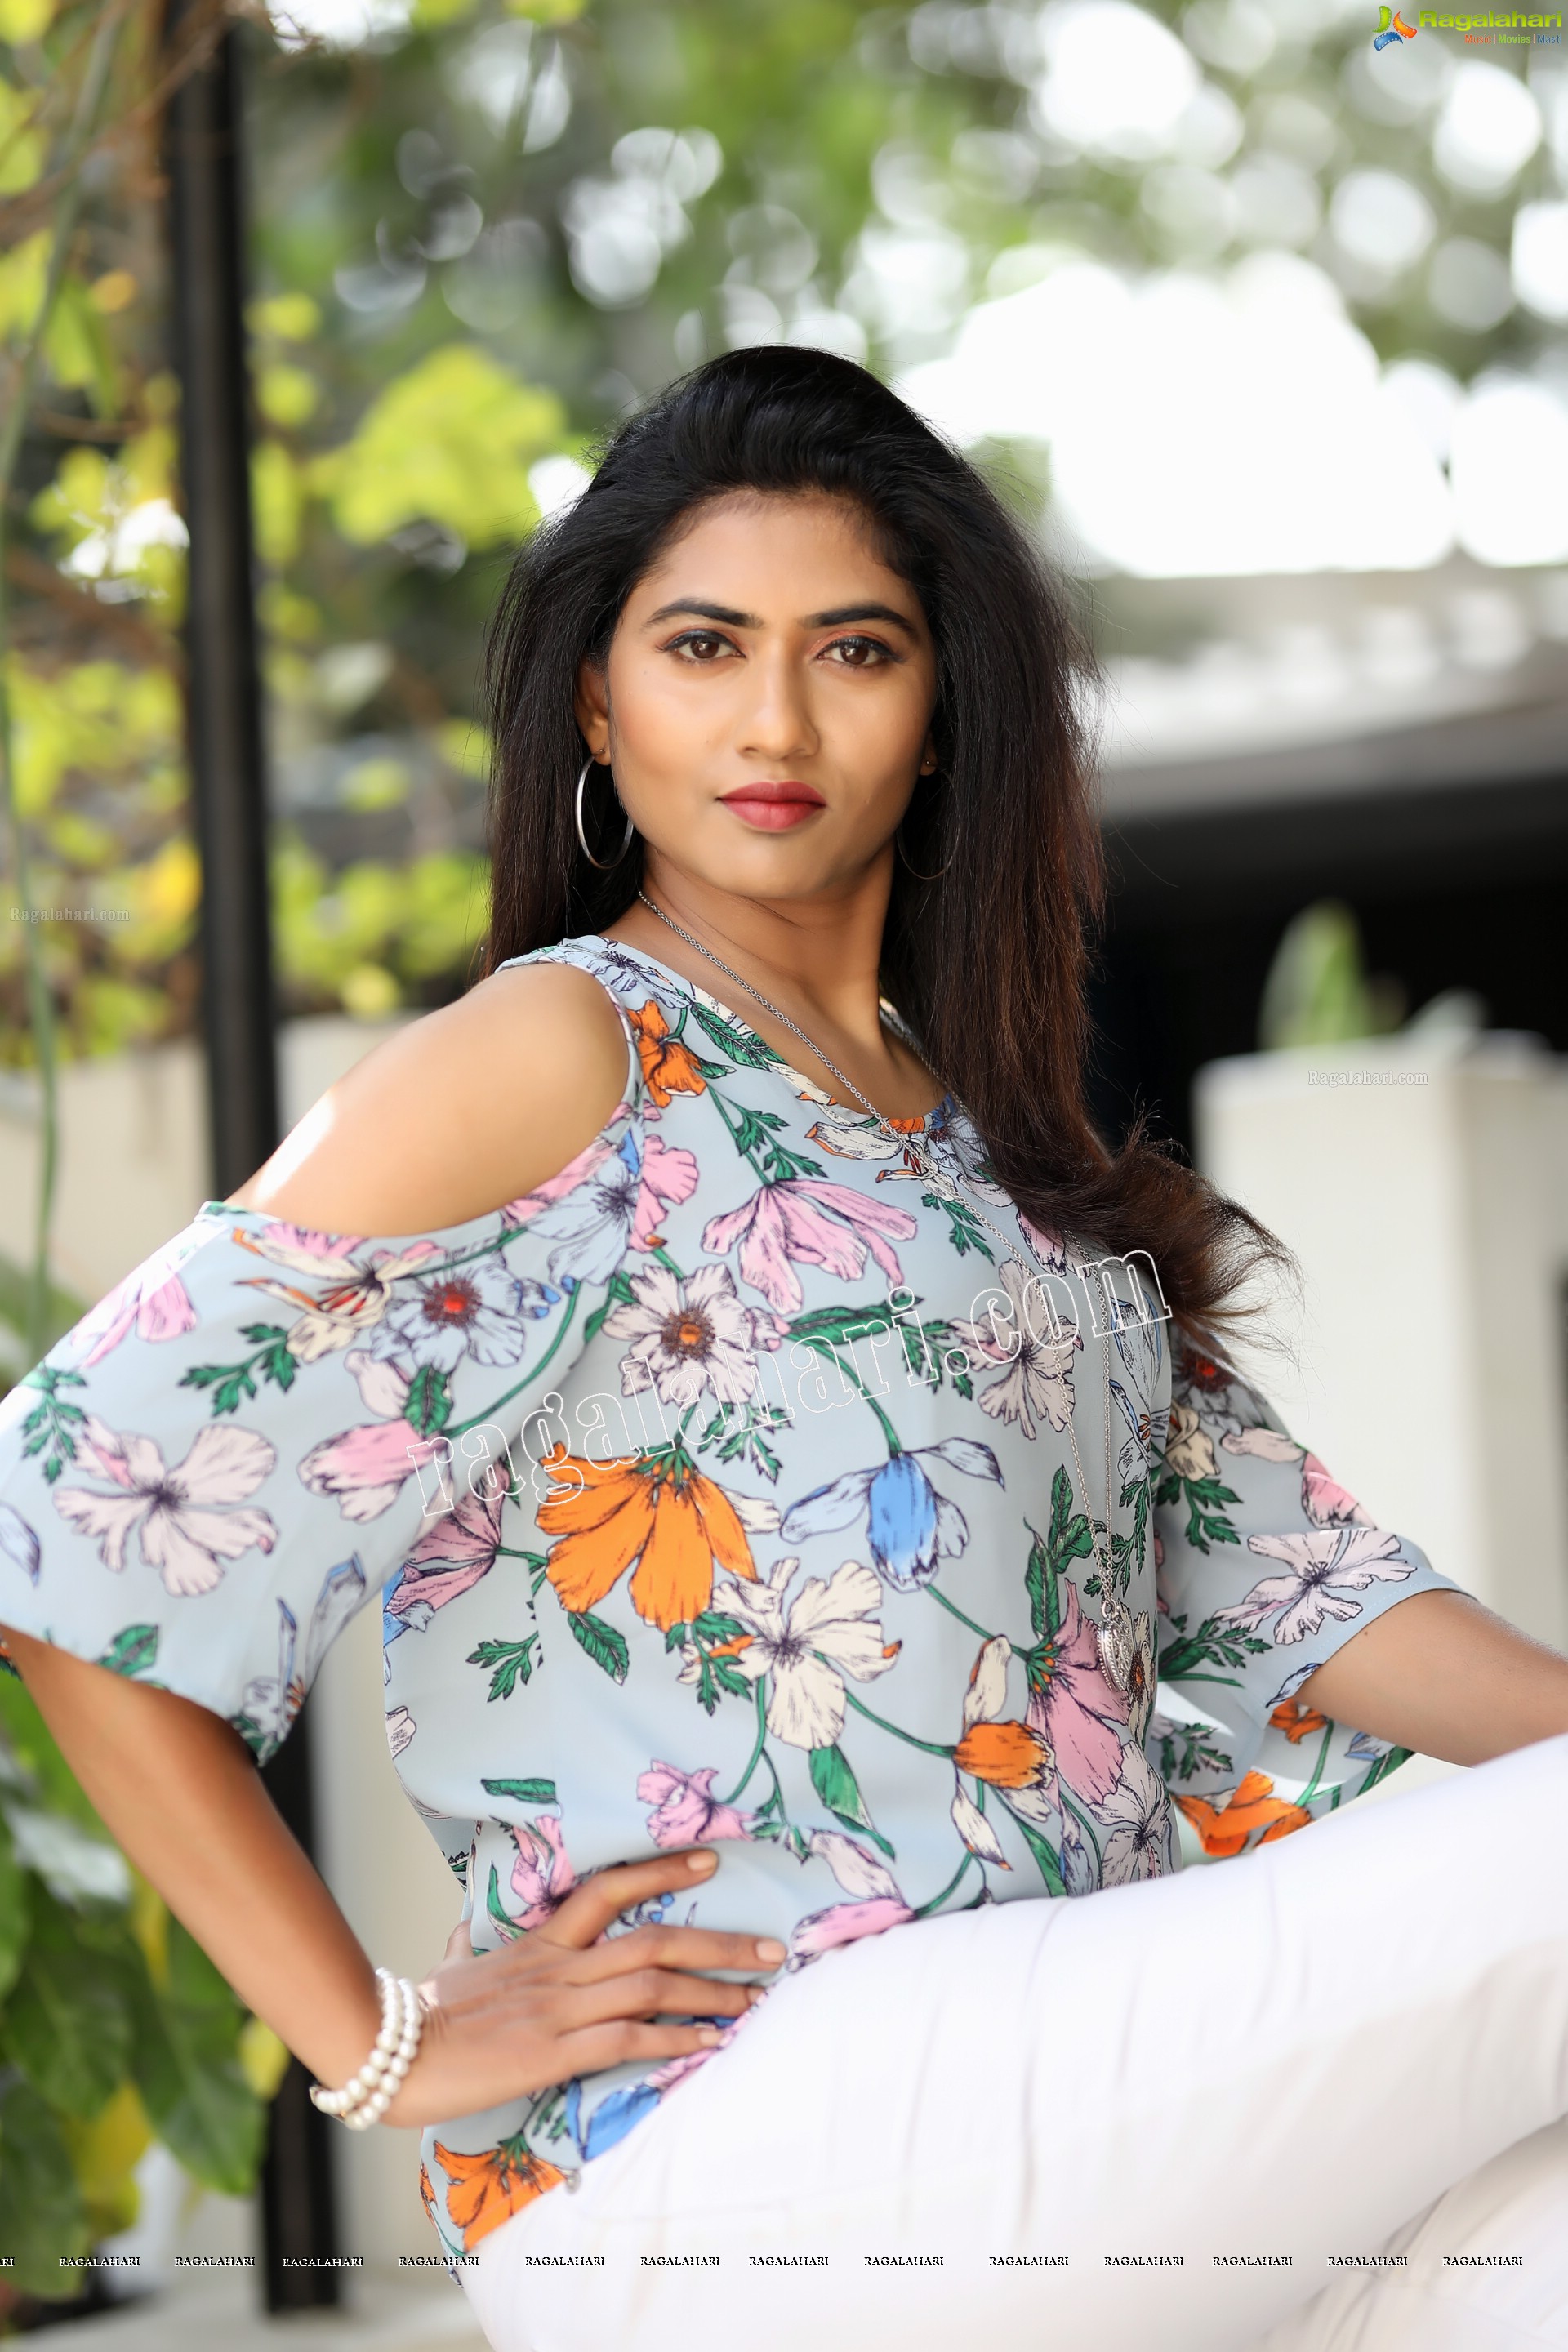 Raja Kumari YN in Pale Blue Floral Printed Top and White Jeans Exclusive Photo Shoot